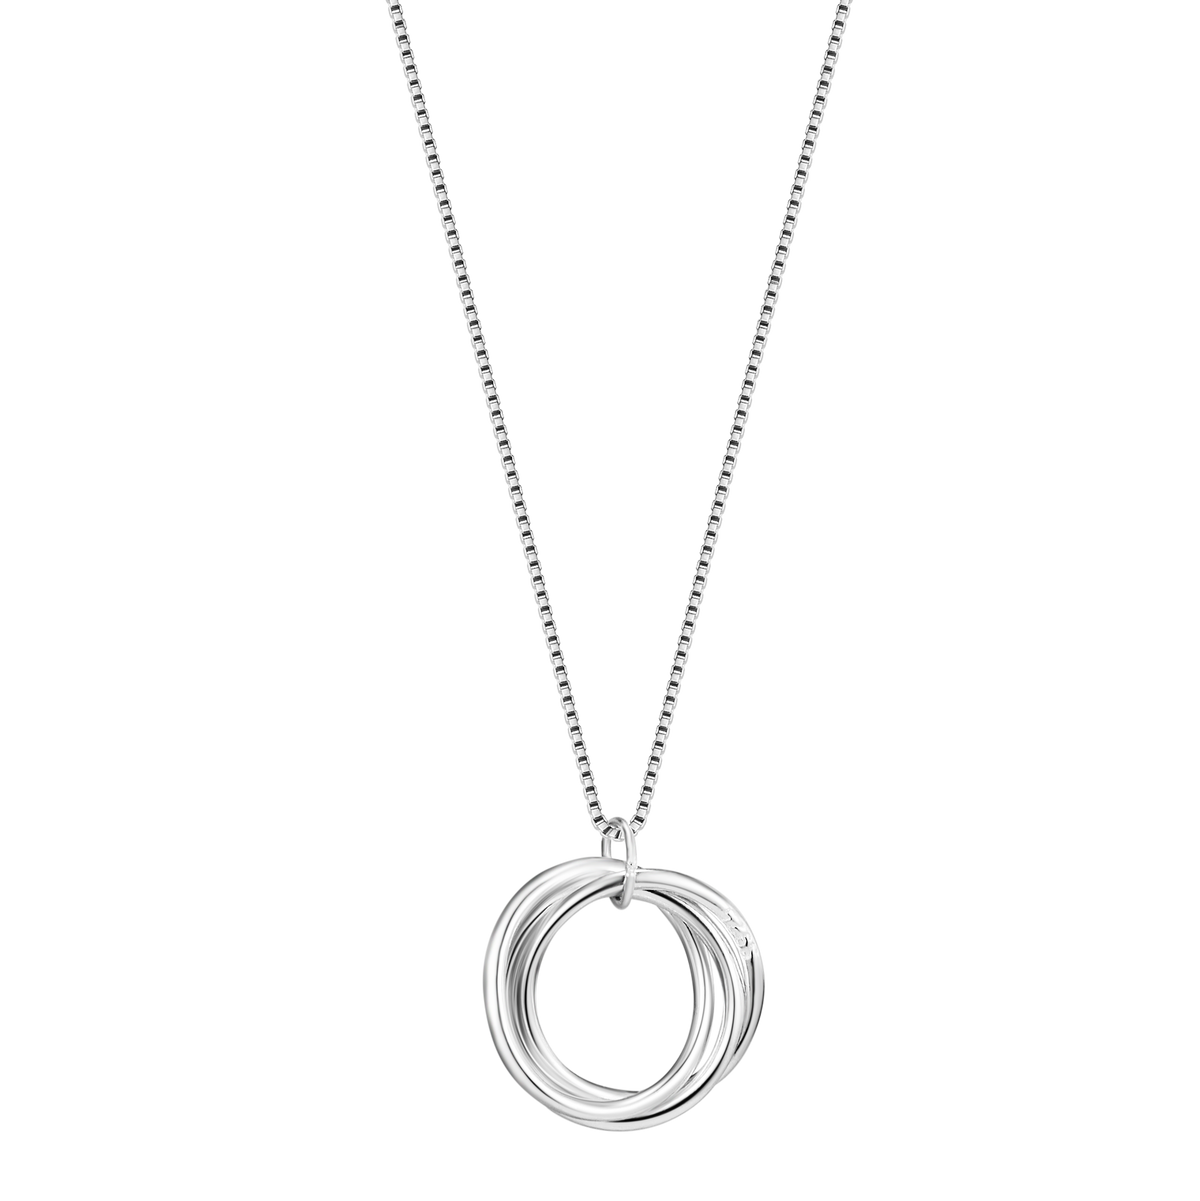 Interwoven Elegance: Sterling Silver Triple Circle Necklace